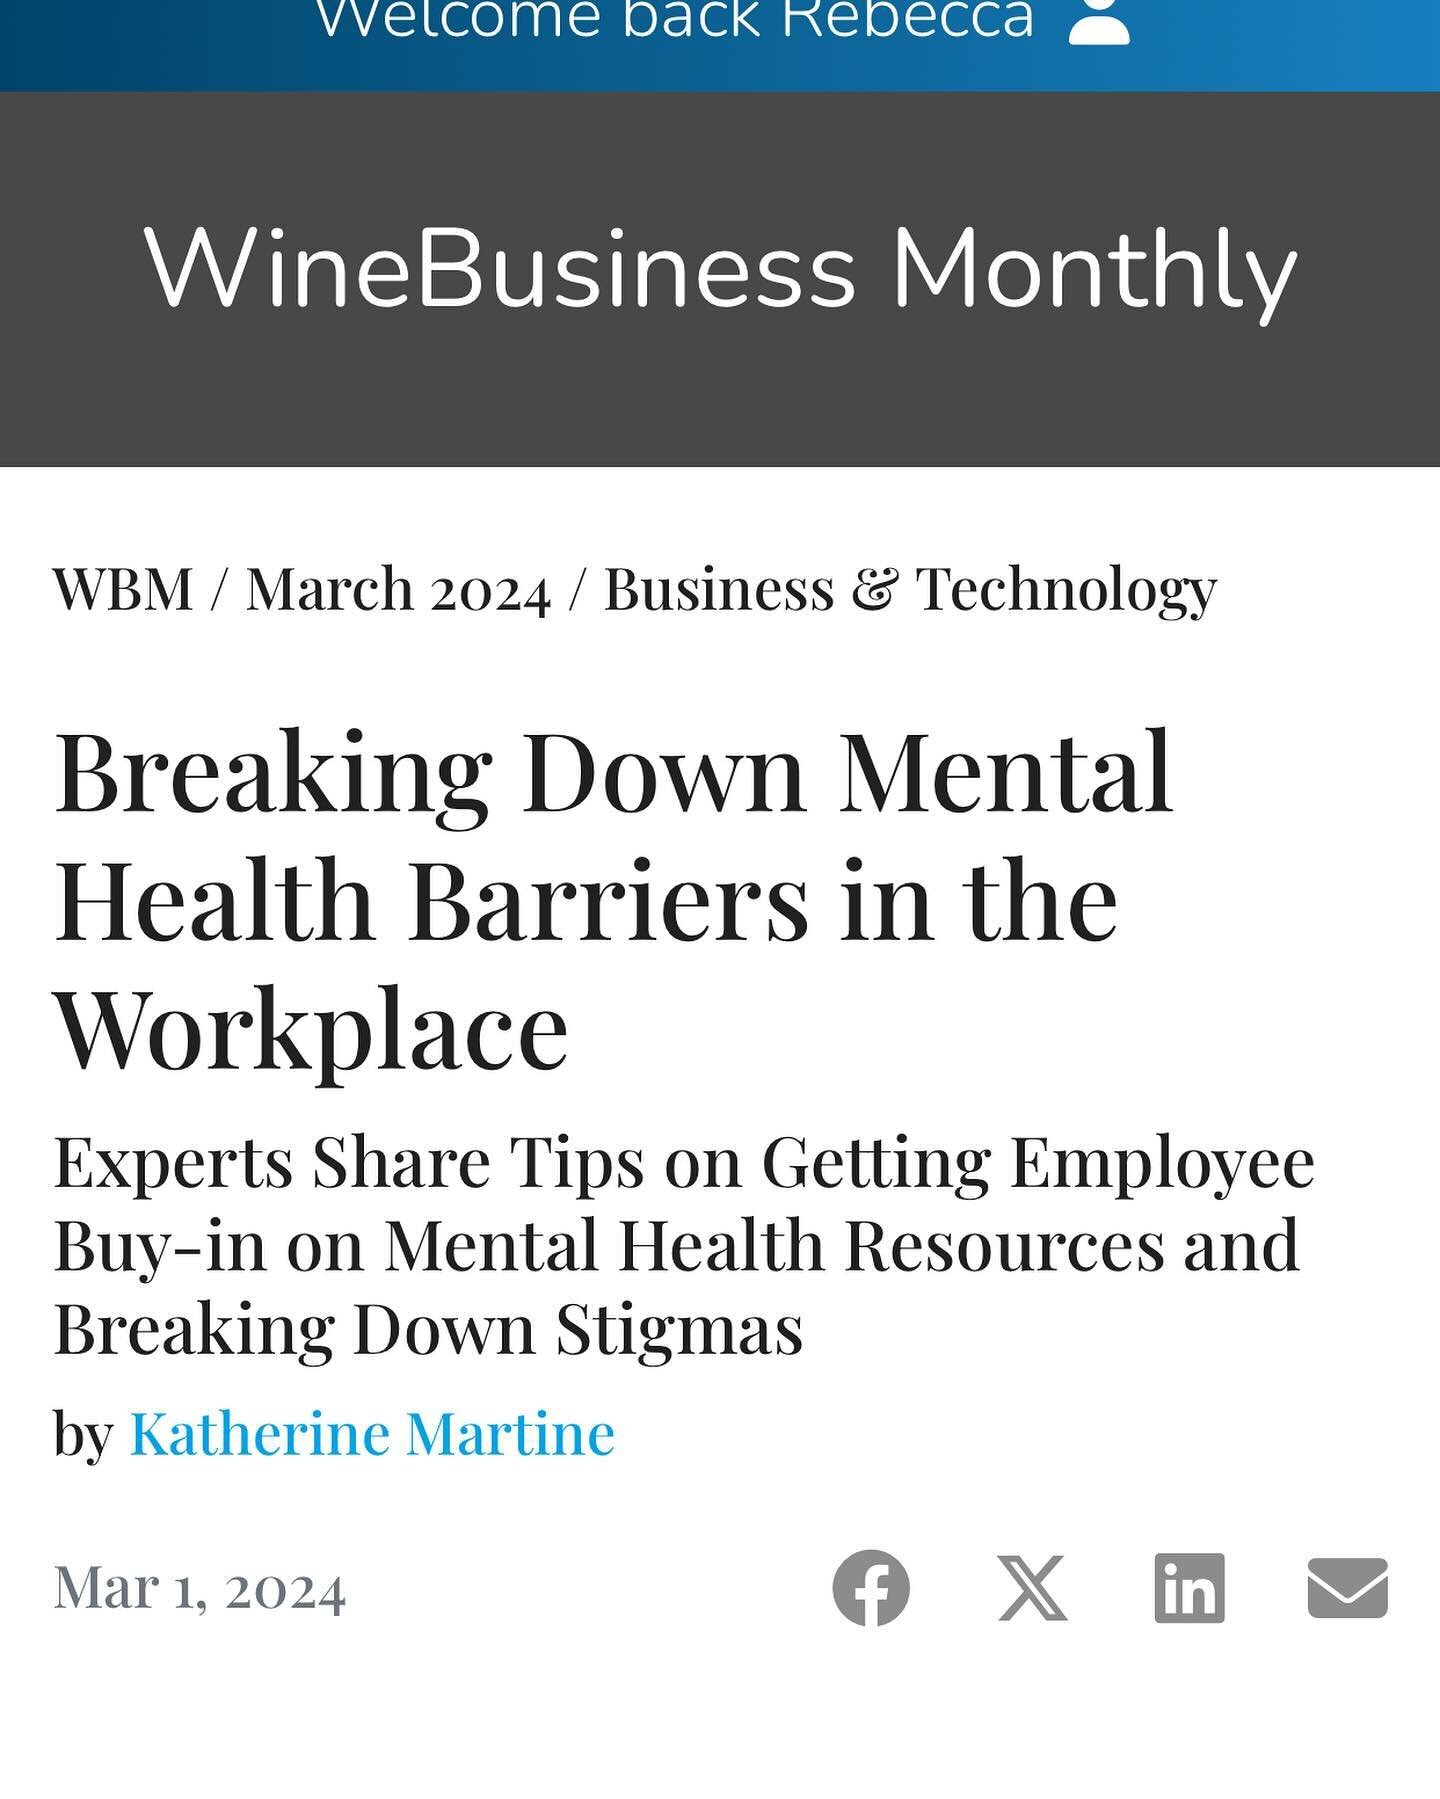 Mental Health in the workplace - does it matter? Of course. And thanks to @erinakirsch and the team at @winebusinessmonthly we had the opportunity to join @laura.louise.green @trefethenfamily to talk about it. 

Thanks @katmartine211 for the deep div